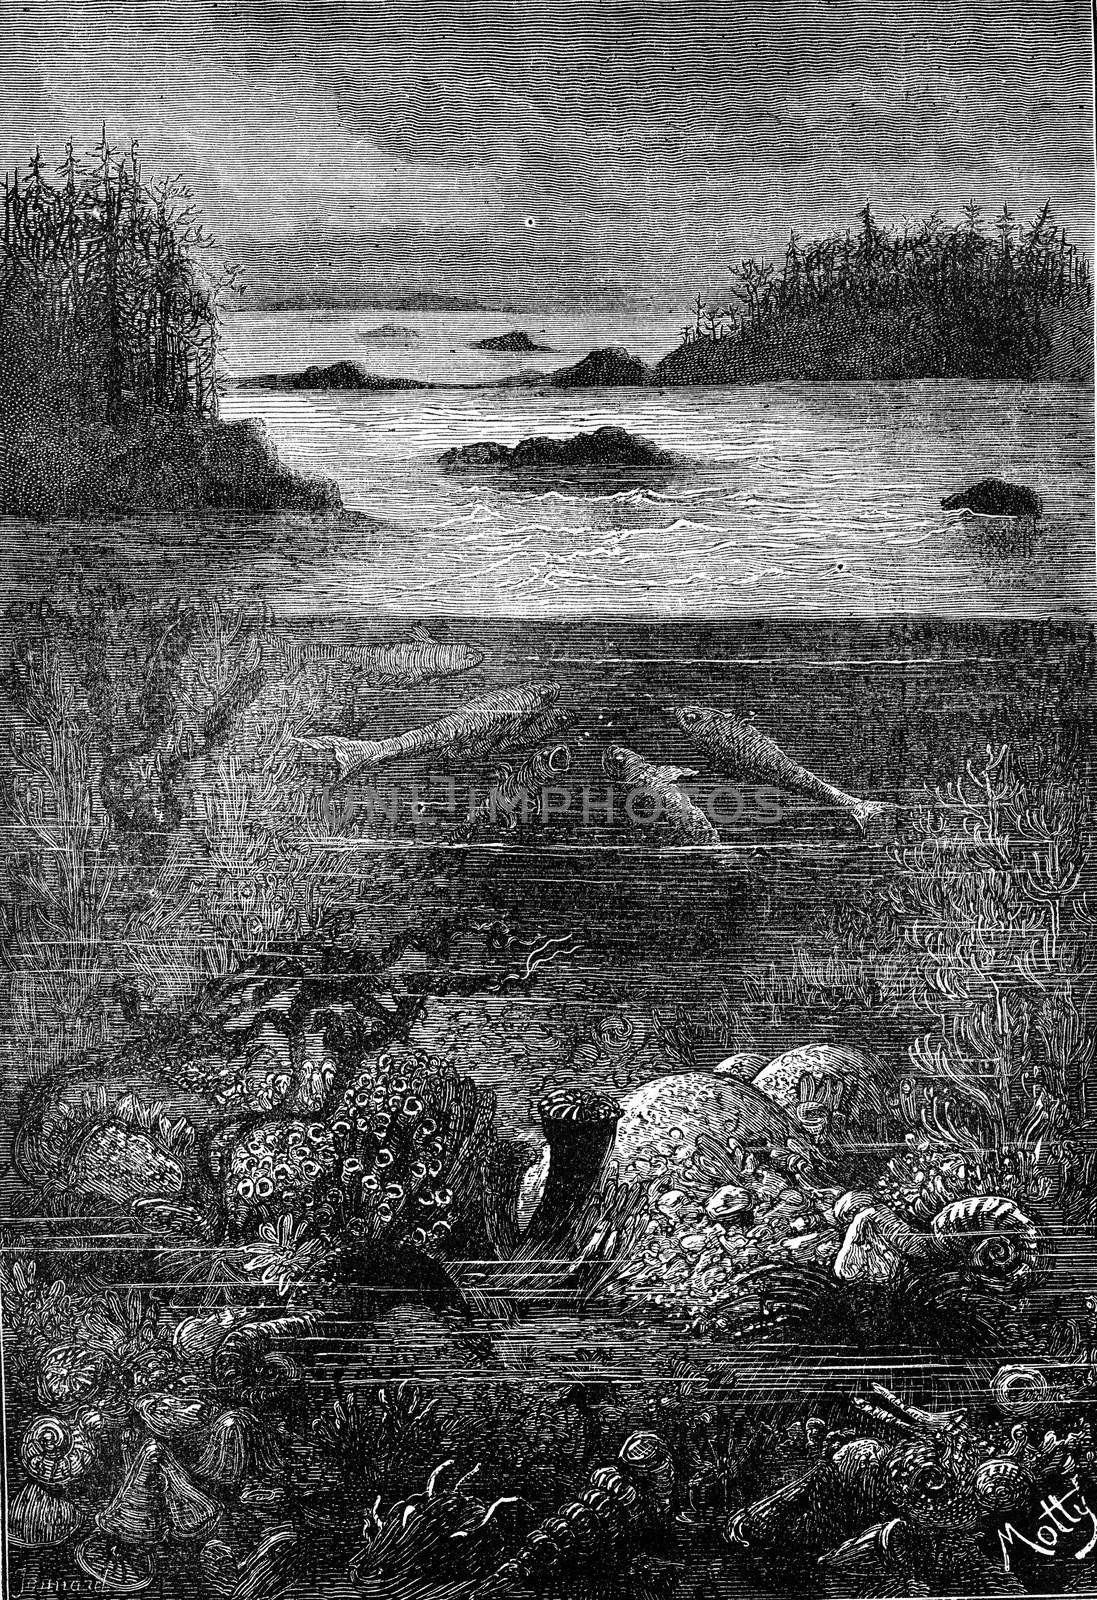 The main inhabitants of the land during the Devonian period. The world before the creation of man, vintage engraved illustration. Earth before man – 1886.
